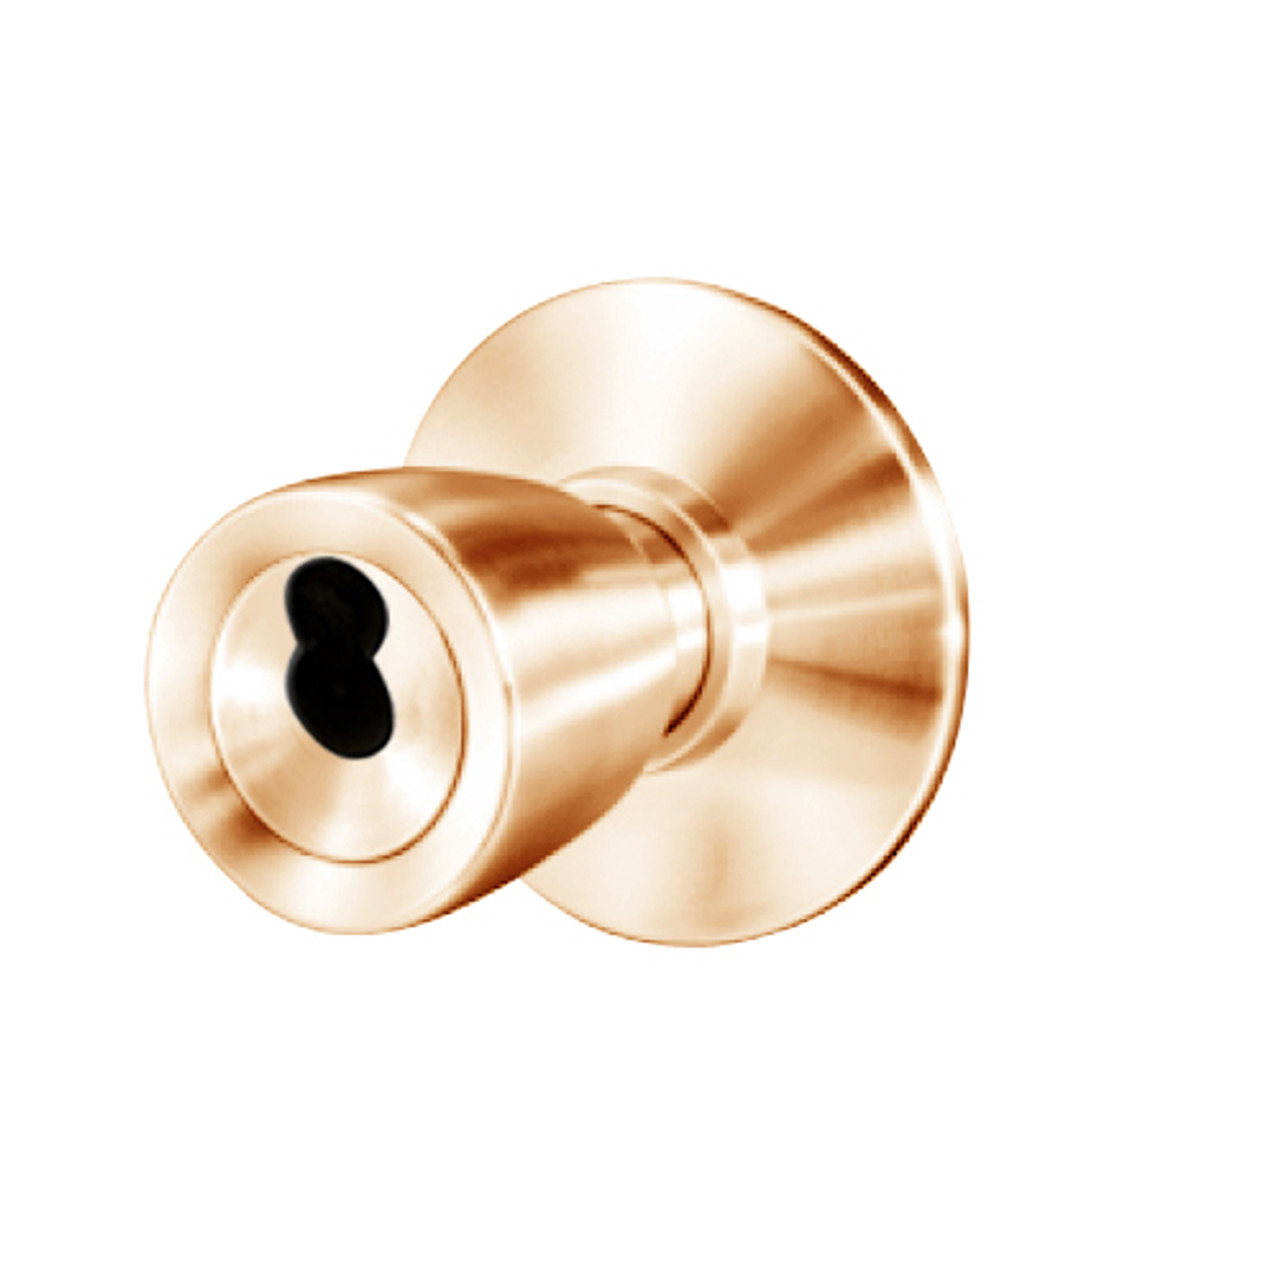 8K37AB6DS3612 Best 8K Series Entrance Heavy Duty Cylindrical Knob Locks with Tulip Style in Satin Bronze